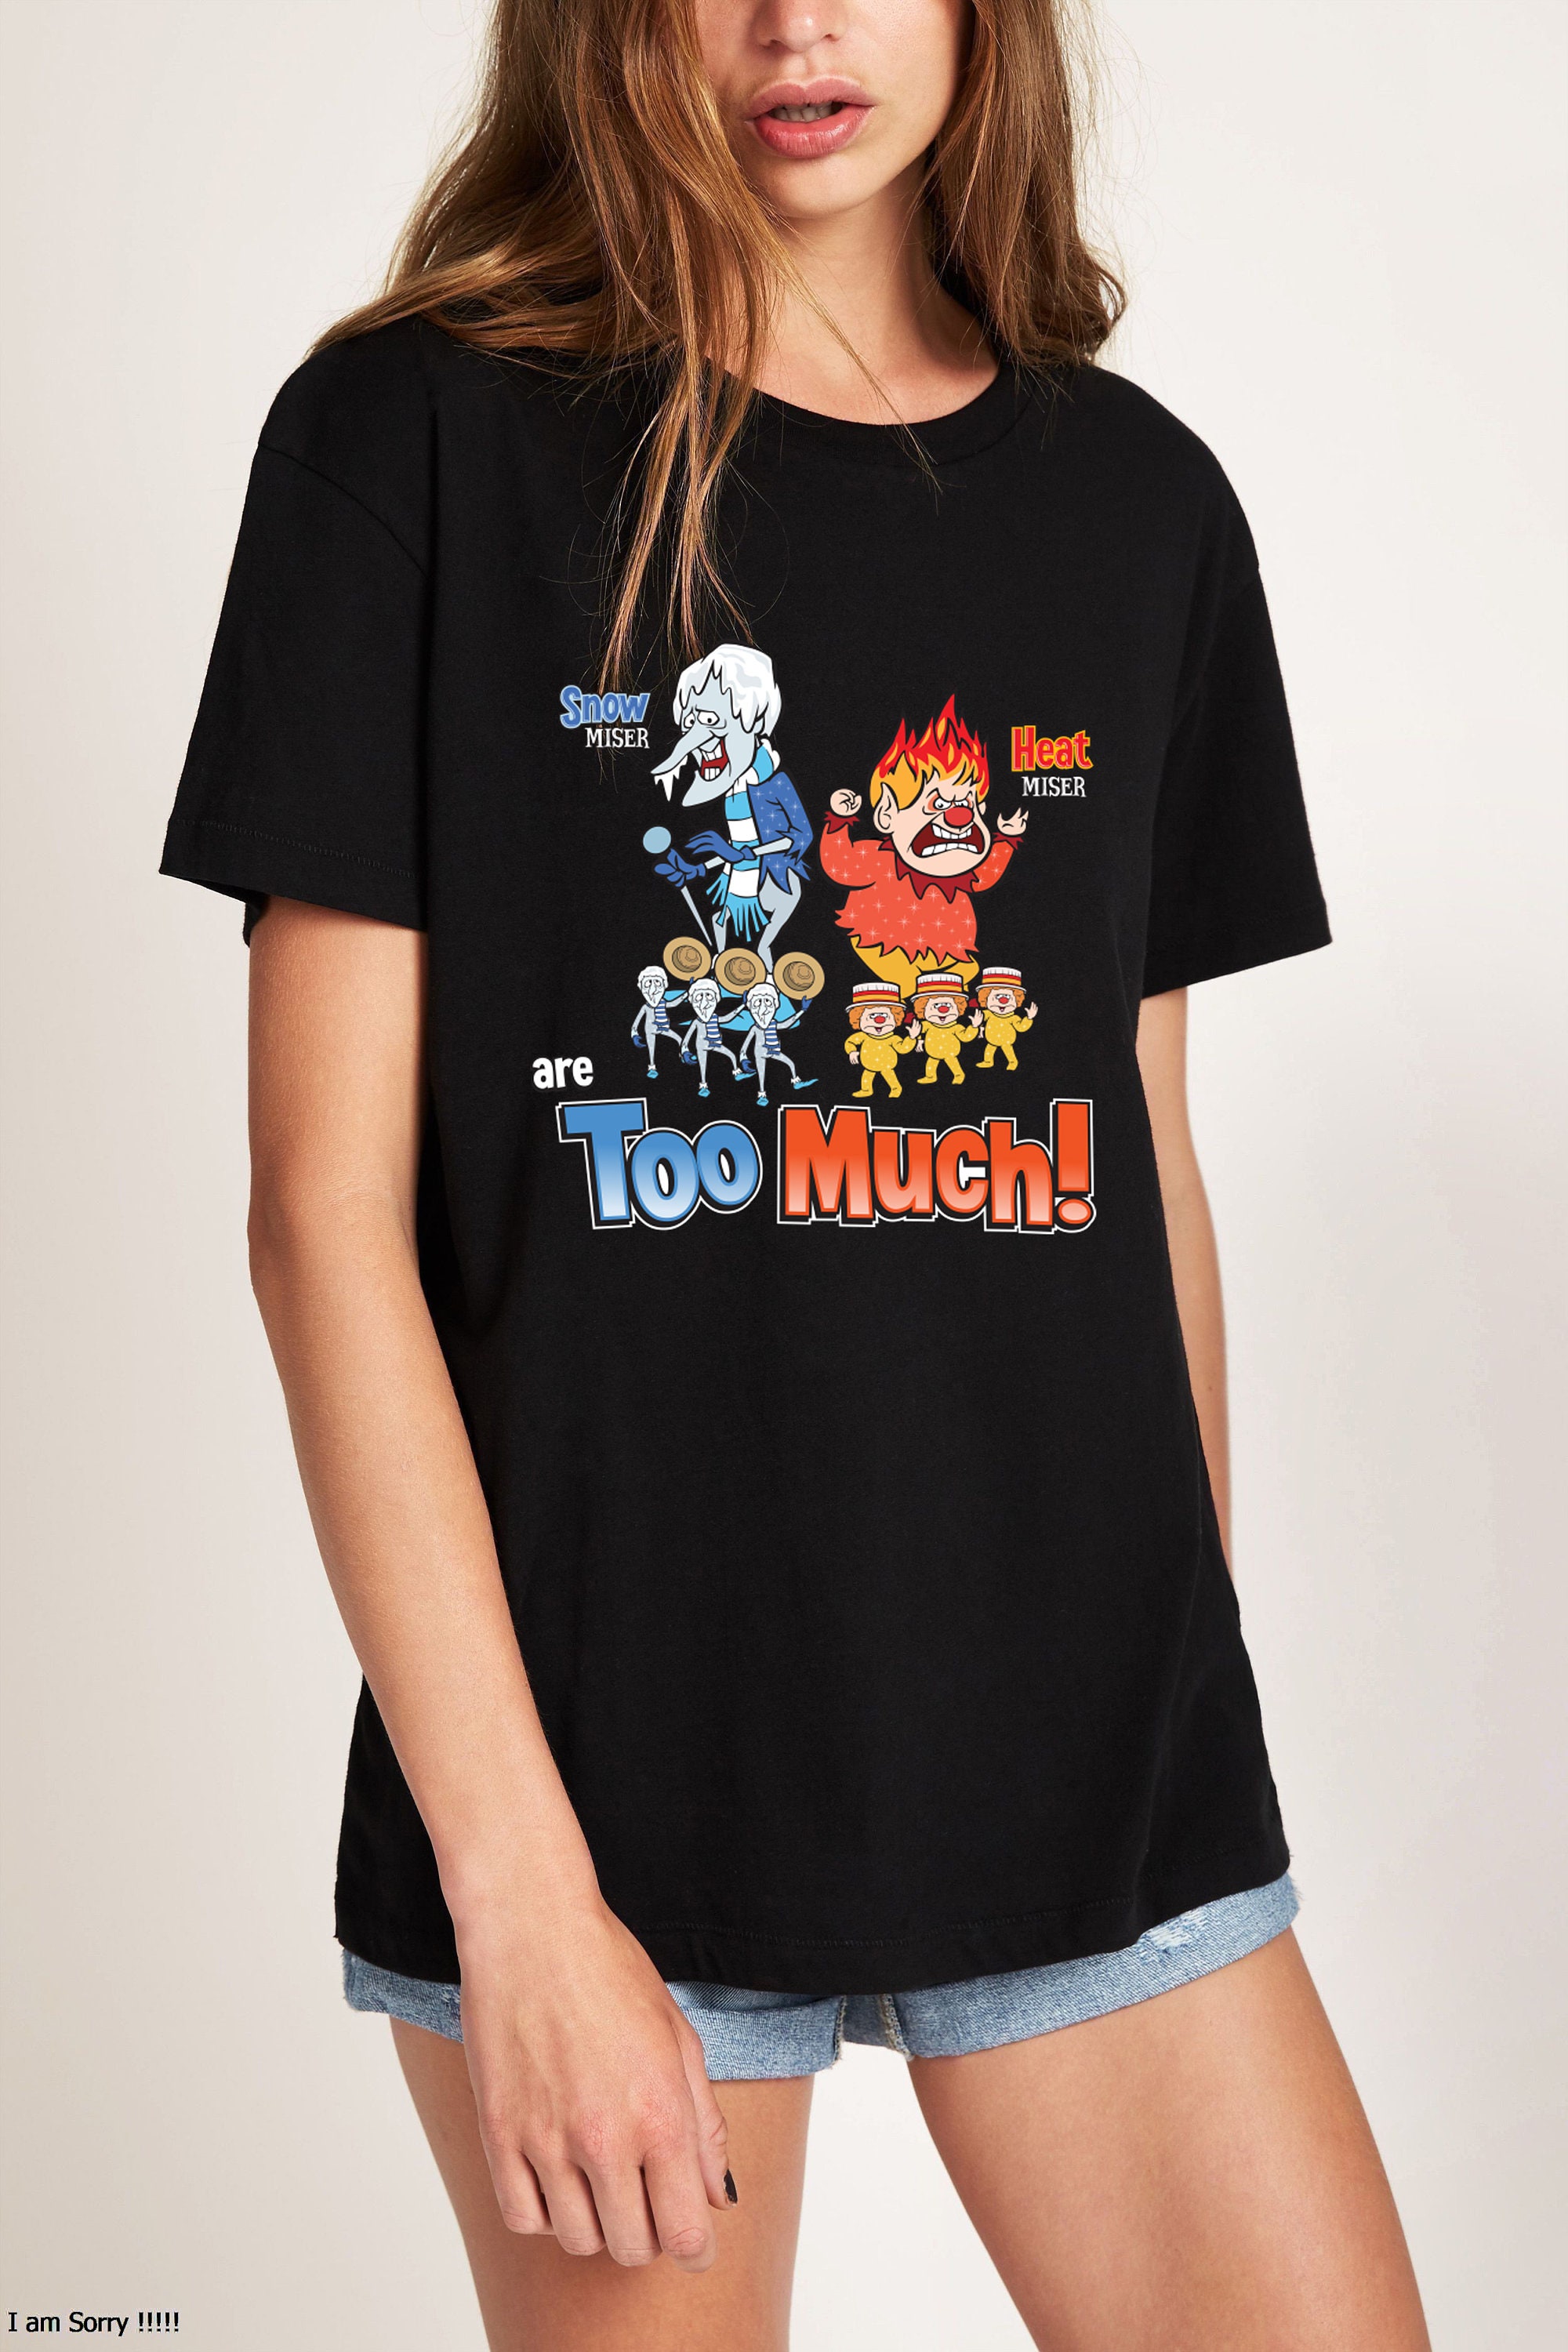 Miser Brothers - Too Much! Shirt, Unisex Tee,